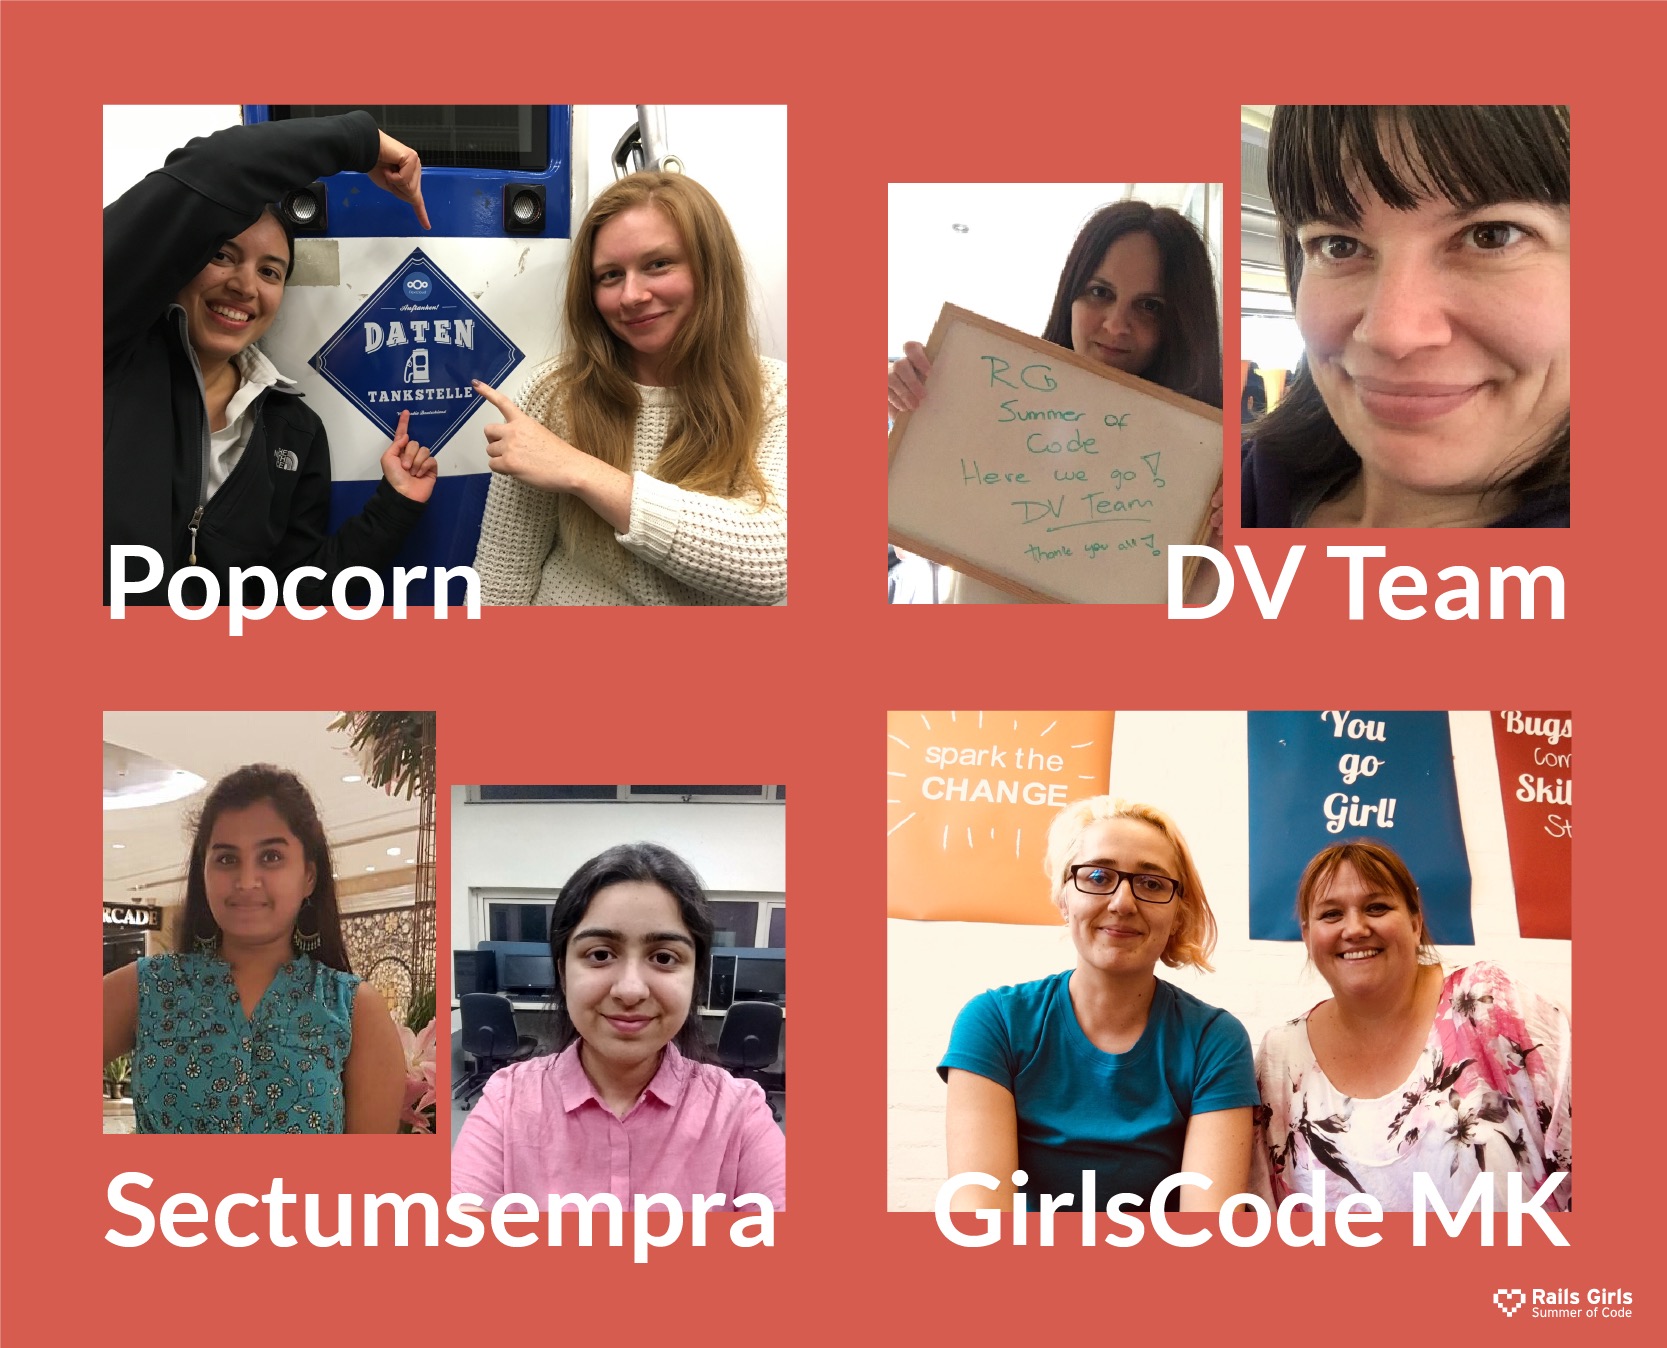 The new teams sponsored: Popcorn, DV Team, Sectumsempra and GirlsCode MK (image by multiple people)